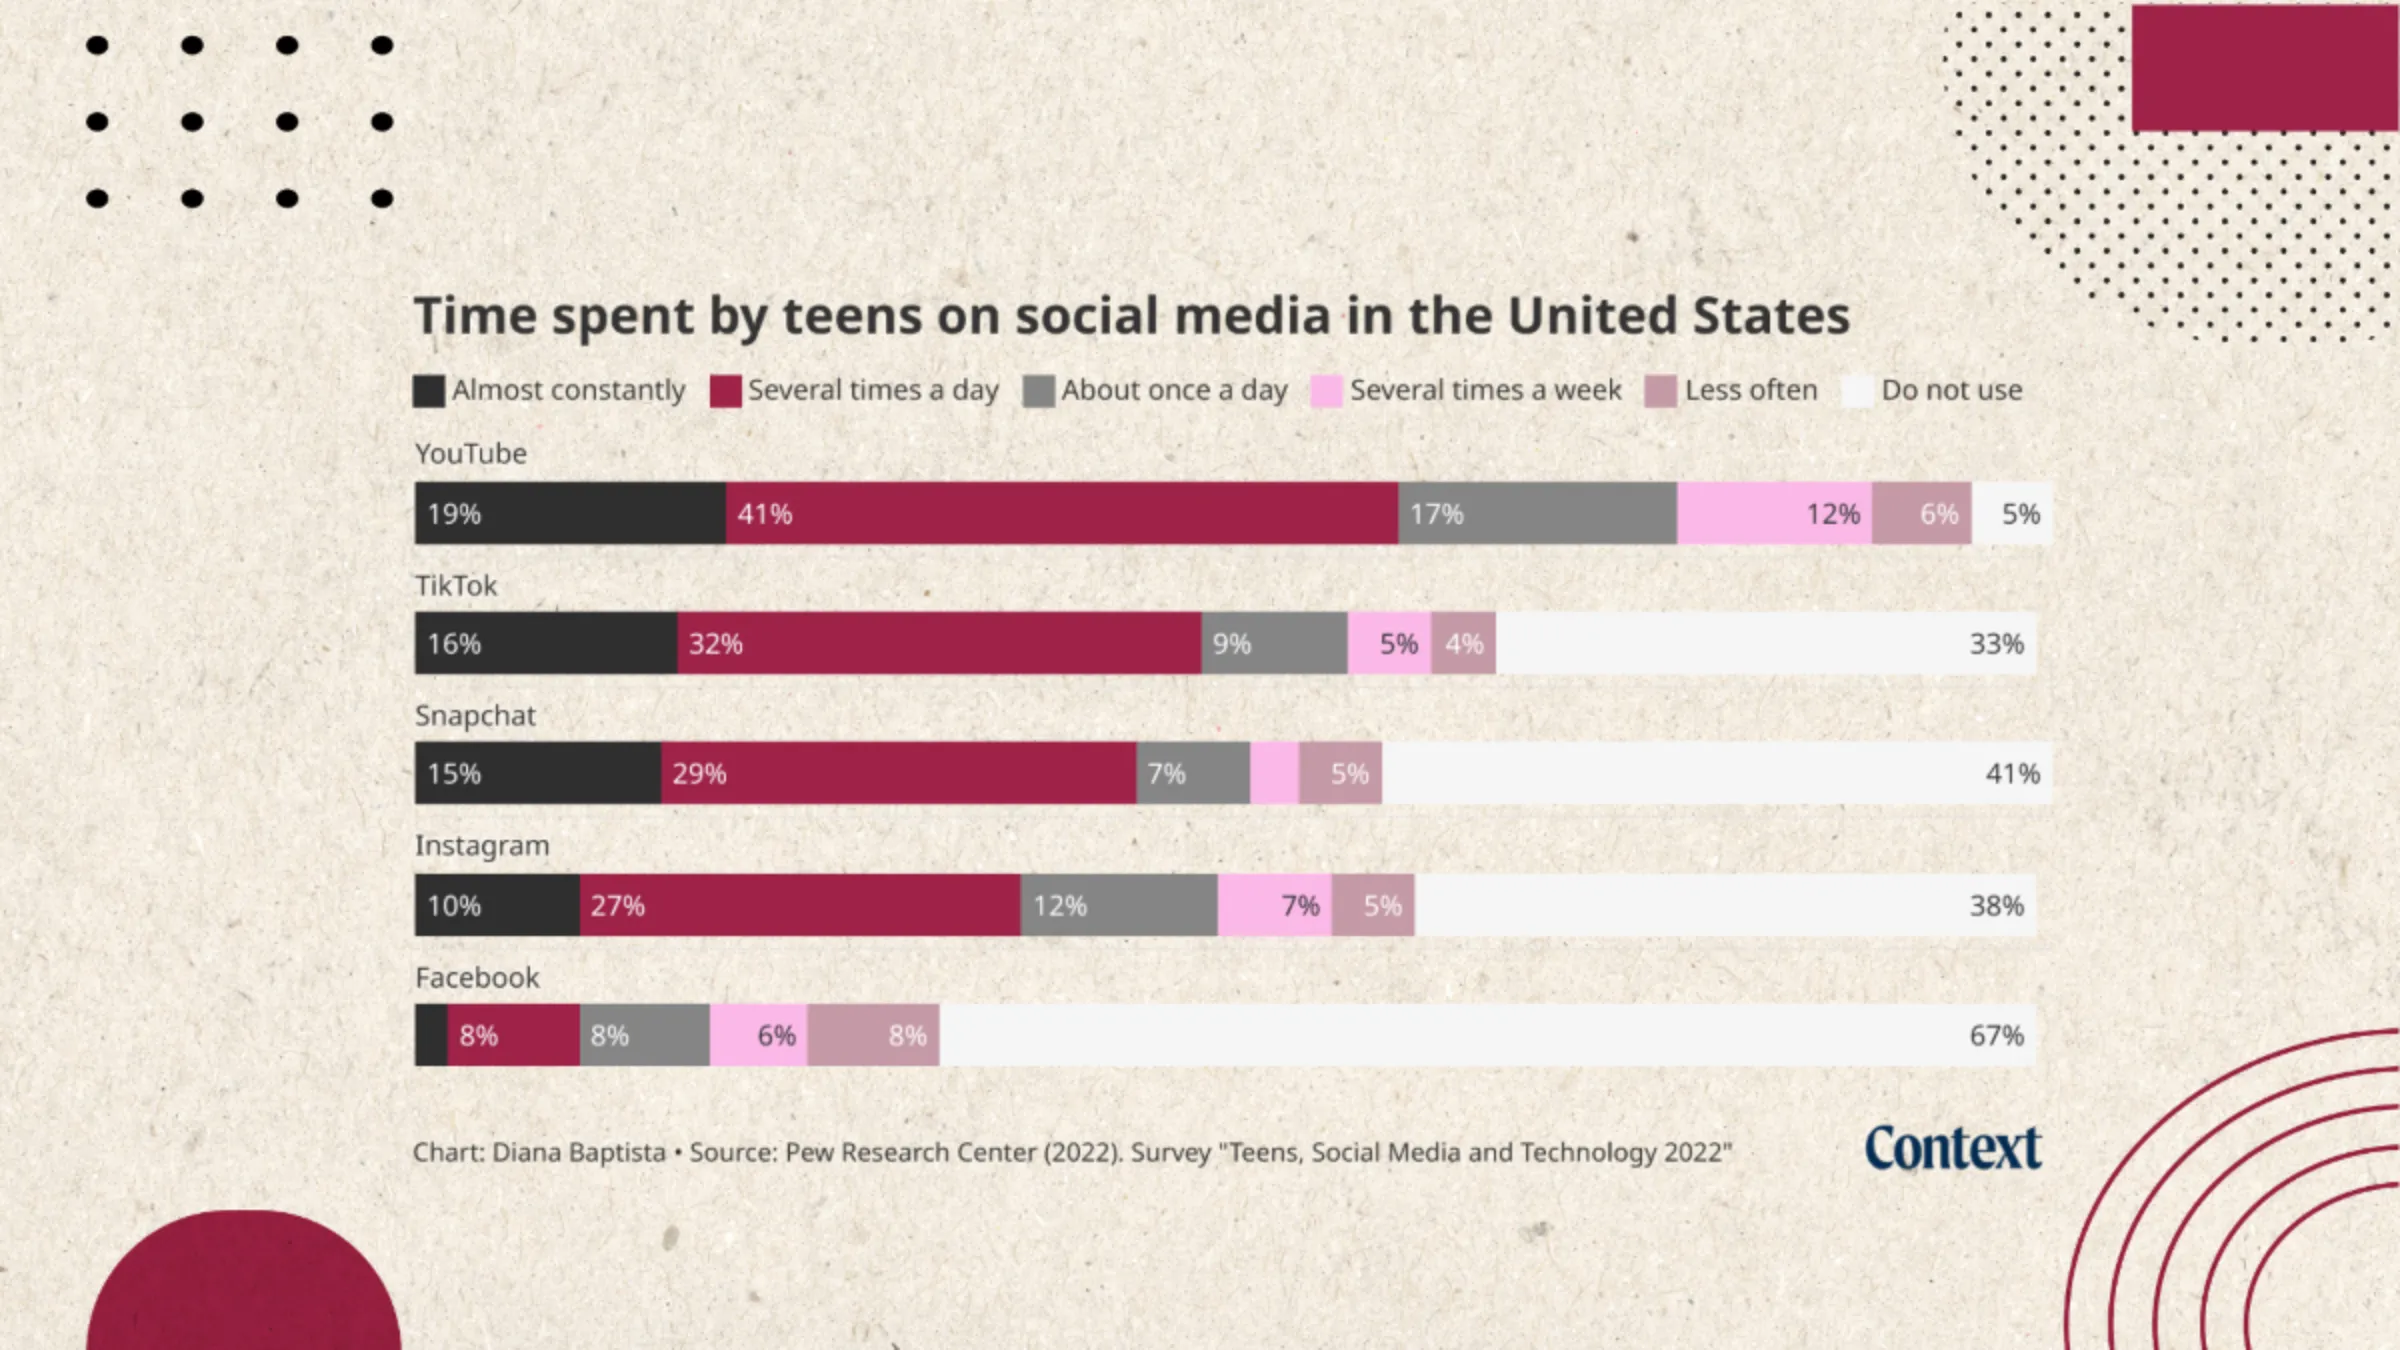 A bar chart labelled 'Time spent by teens on social media in the United States'. The chart shows a bar for five social media sites split by percentages of use defined as Almost constantly, Several times a day, About once a day, Several times a week, Less often, and Do not use. 
The chart data from most to least is as follows:
YouTube: 19%, 41%, 17%, 12%, 6%, 5%
TikTok: 16%, 32%, 9%, 5%, 4%, 33%
Snapchat: 15%, 29%, 7%, 3%, 5%, 41%
Instagram: 10%, 27%, 12%, 7%, 5%, 38%
Facebook: 2%, 8%, 8%, 6%, 8%, 67%
Chart: Thomson Reuters Foundation/Diana Baptista. Source: Pew Research Center (2022). Survey: 'Teens, Social Media and Technoogy 2022'